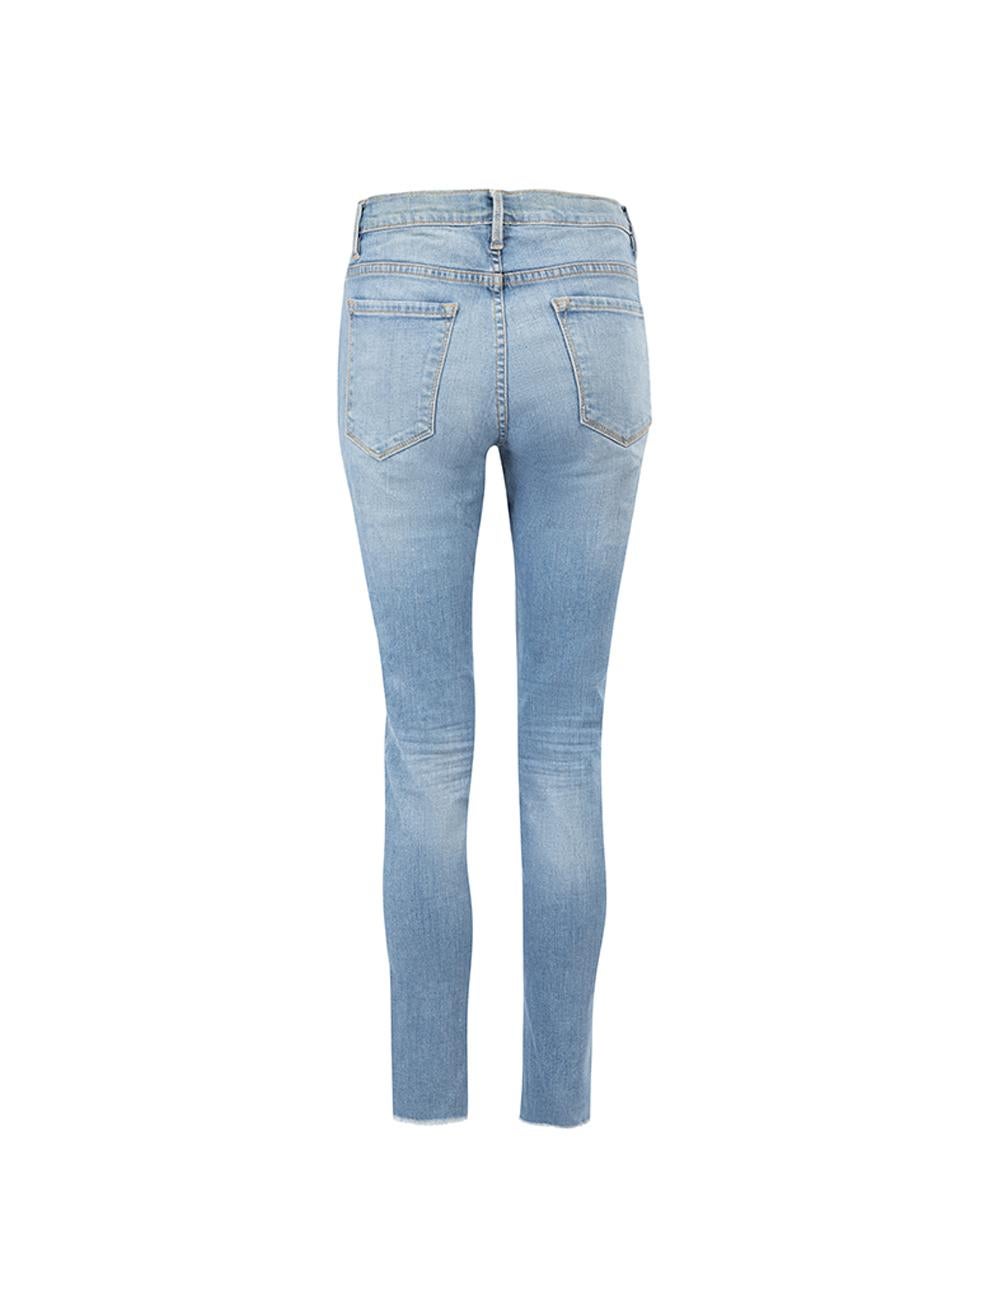 Blue Le Skinny de Jeanne Crop Jeans Size L In Good Condition For Sale In London, GB